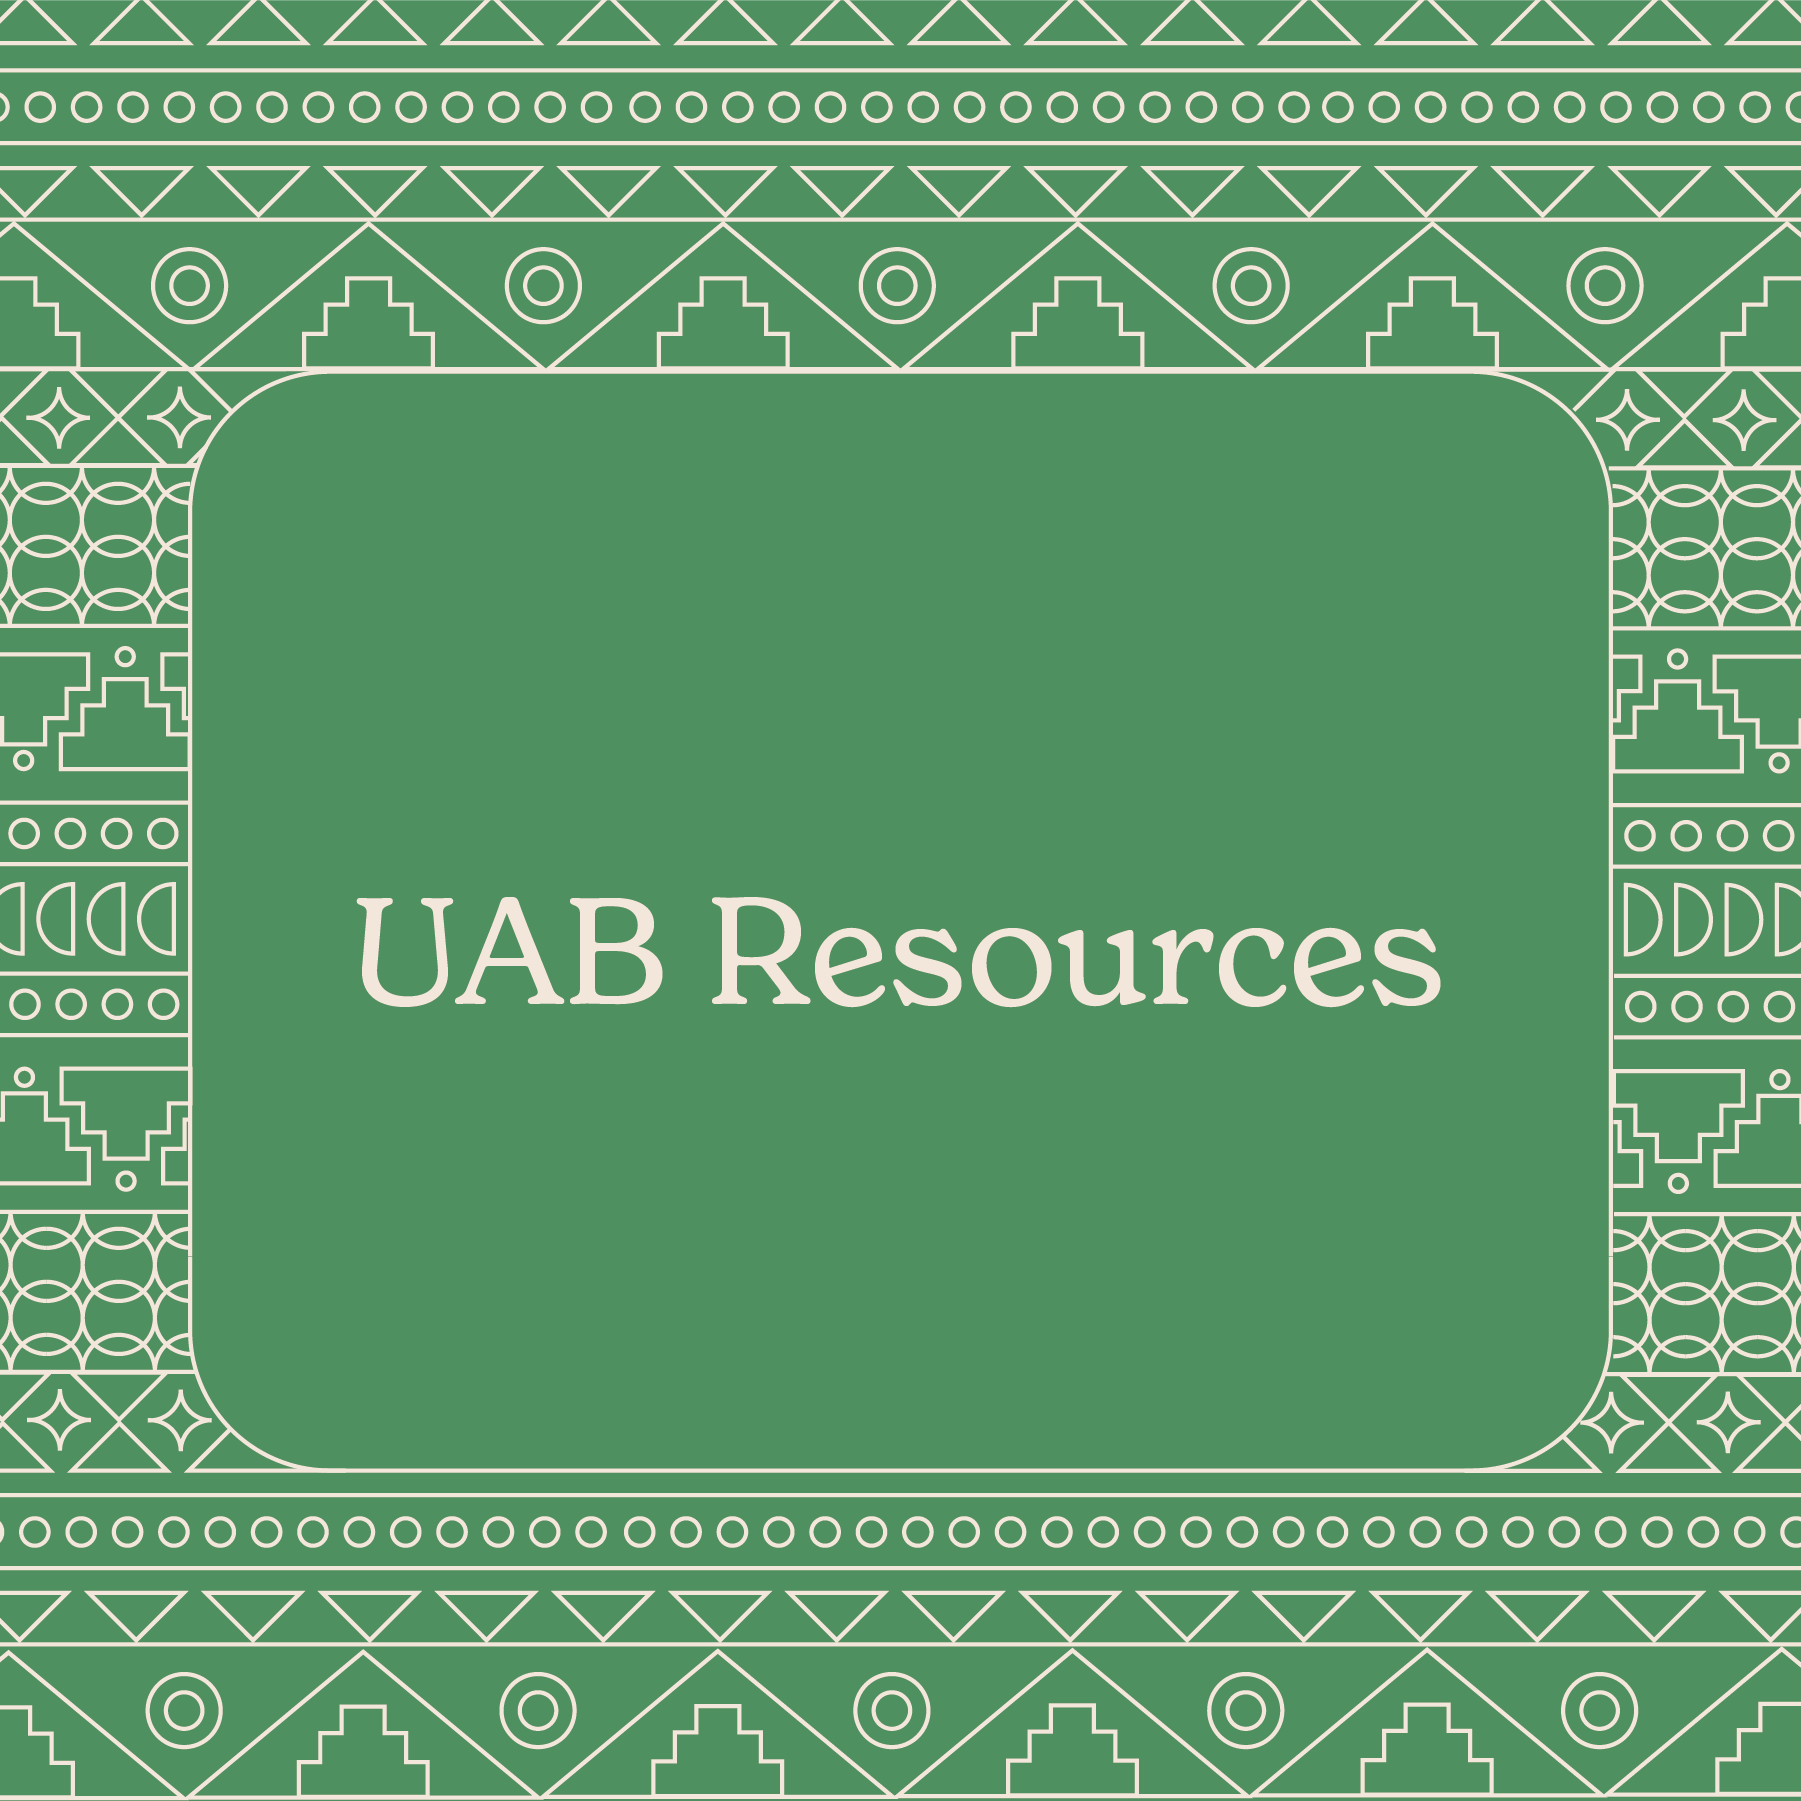 UAB Resources